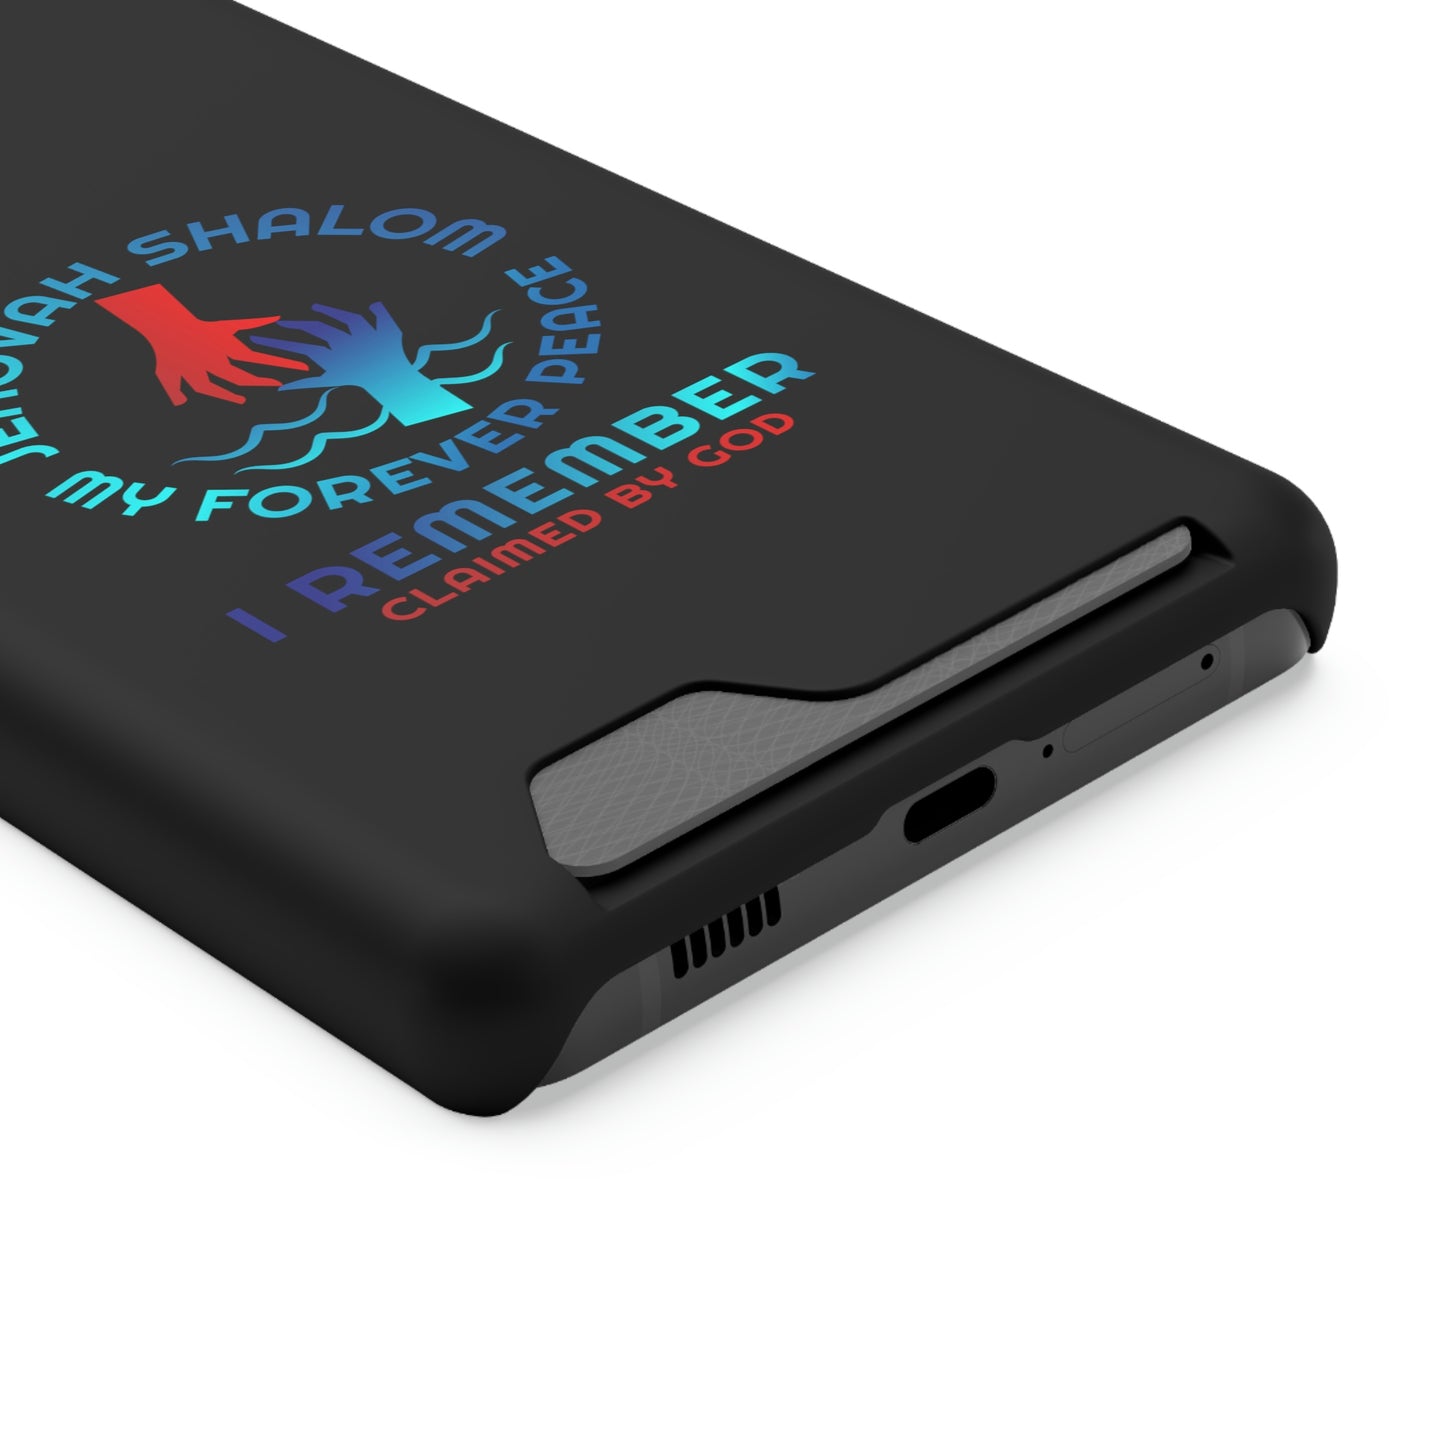 Jehovah Shalom My Forever Peace I Remember Phone Case With Card Holder